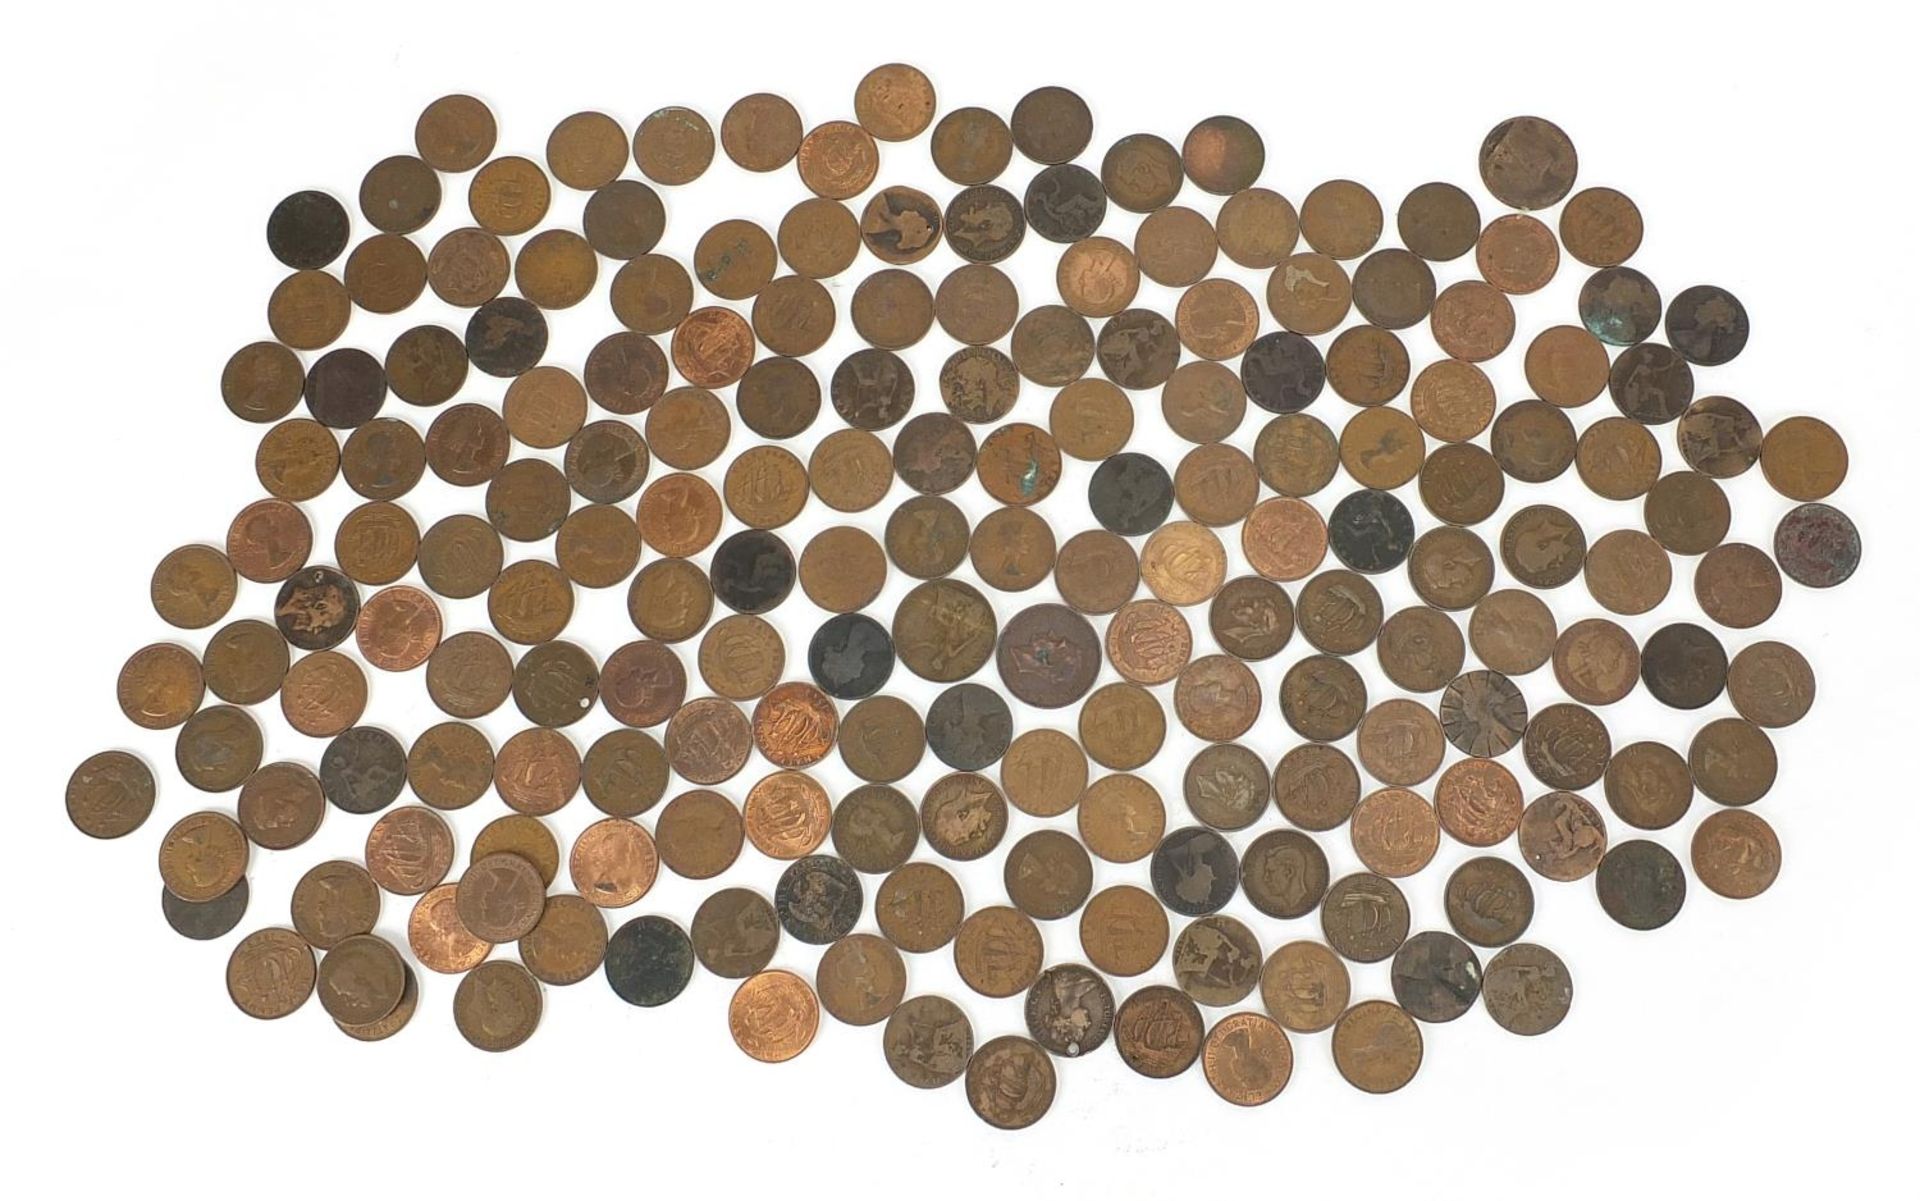 Coinage including half pennies